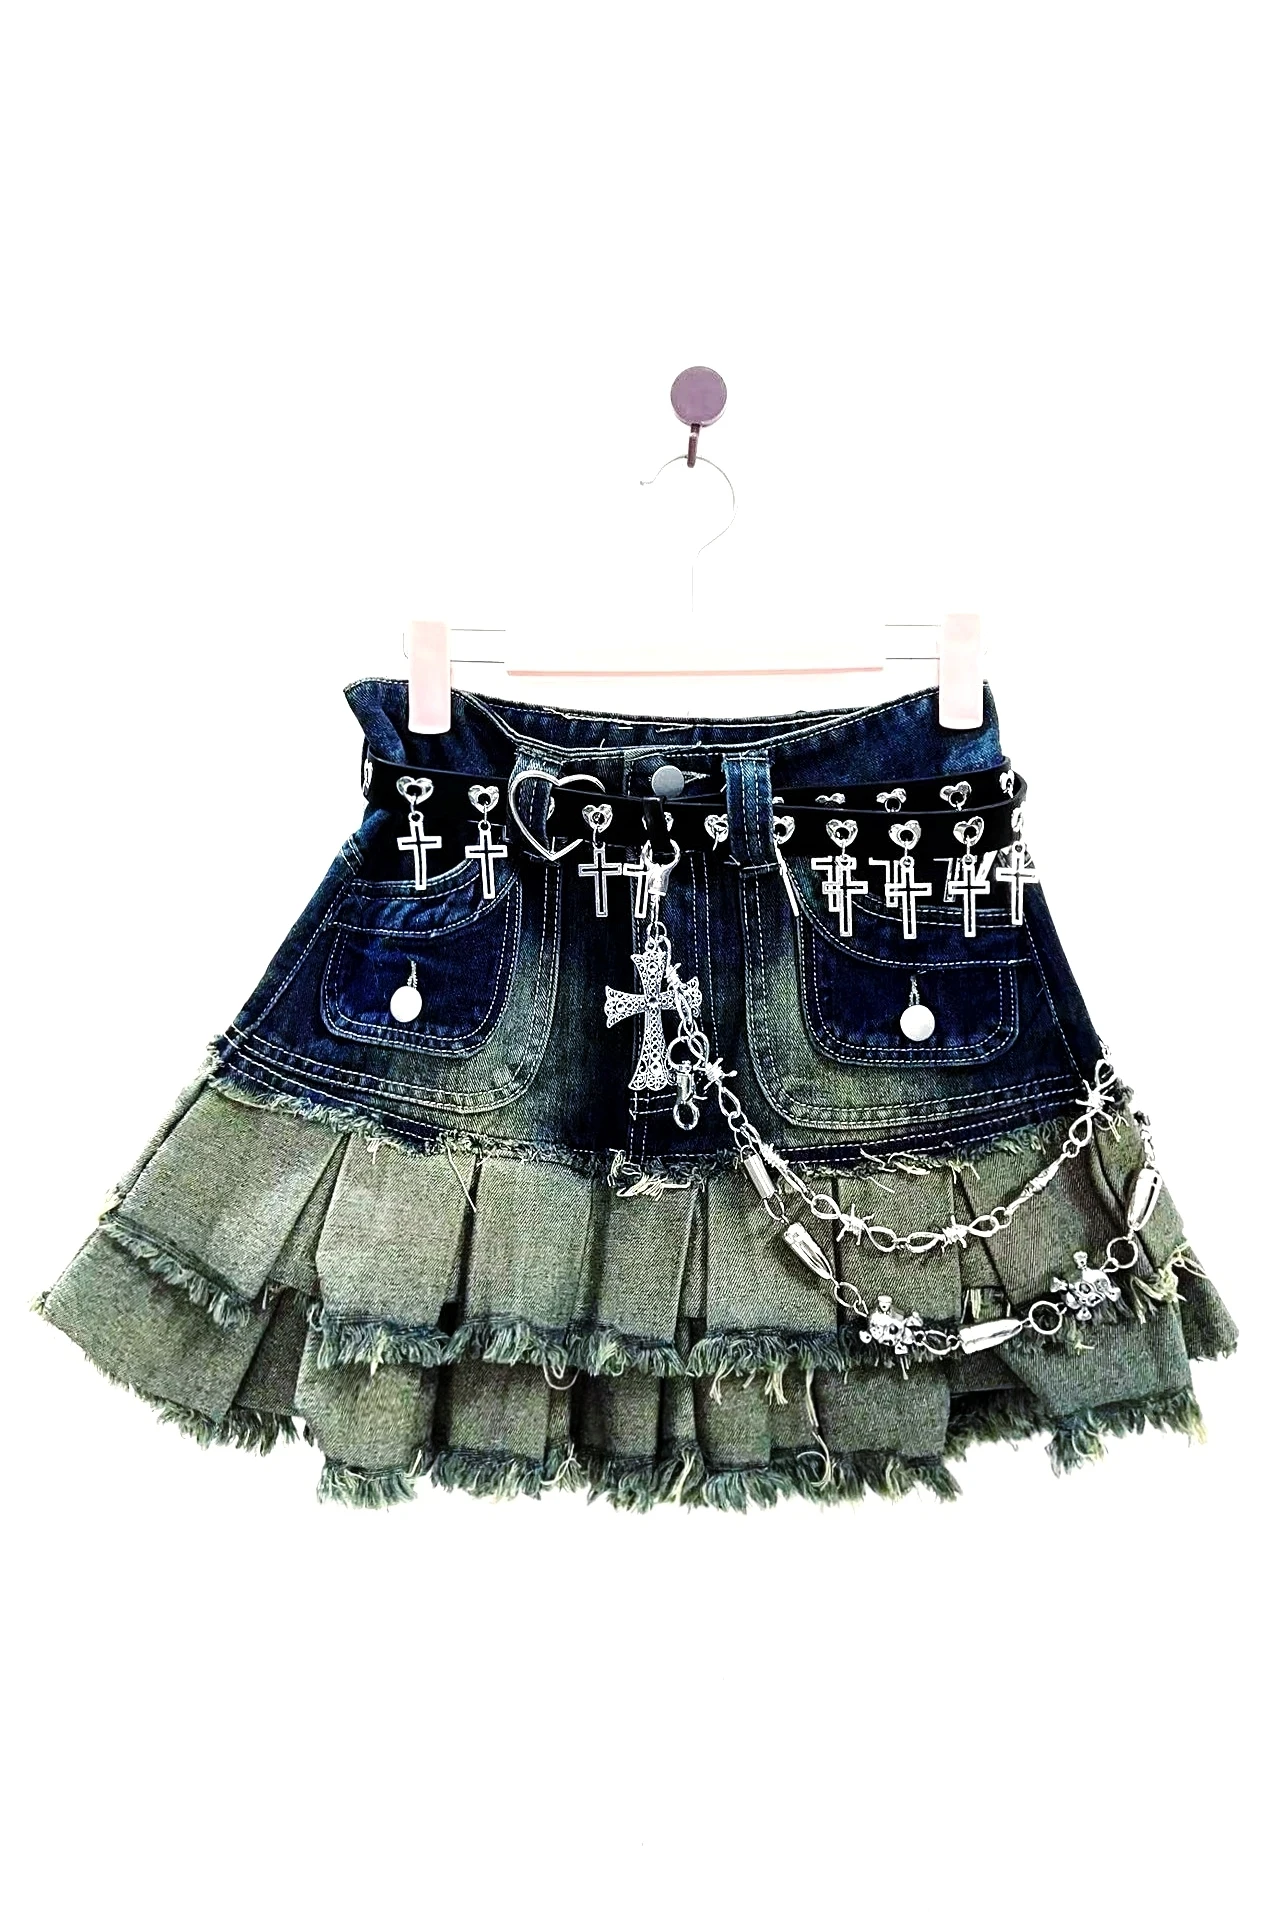 Original Subculture Y2k Clothes American Retro Denim Short Skirt Double Layer Ruffles Pleated Mini Skirt Punk Rock Grunge Skirts pearl diary women lace join together retro small floral t shirt fashion slash neck ruffles top women all match thin pullover shi